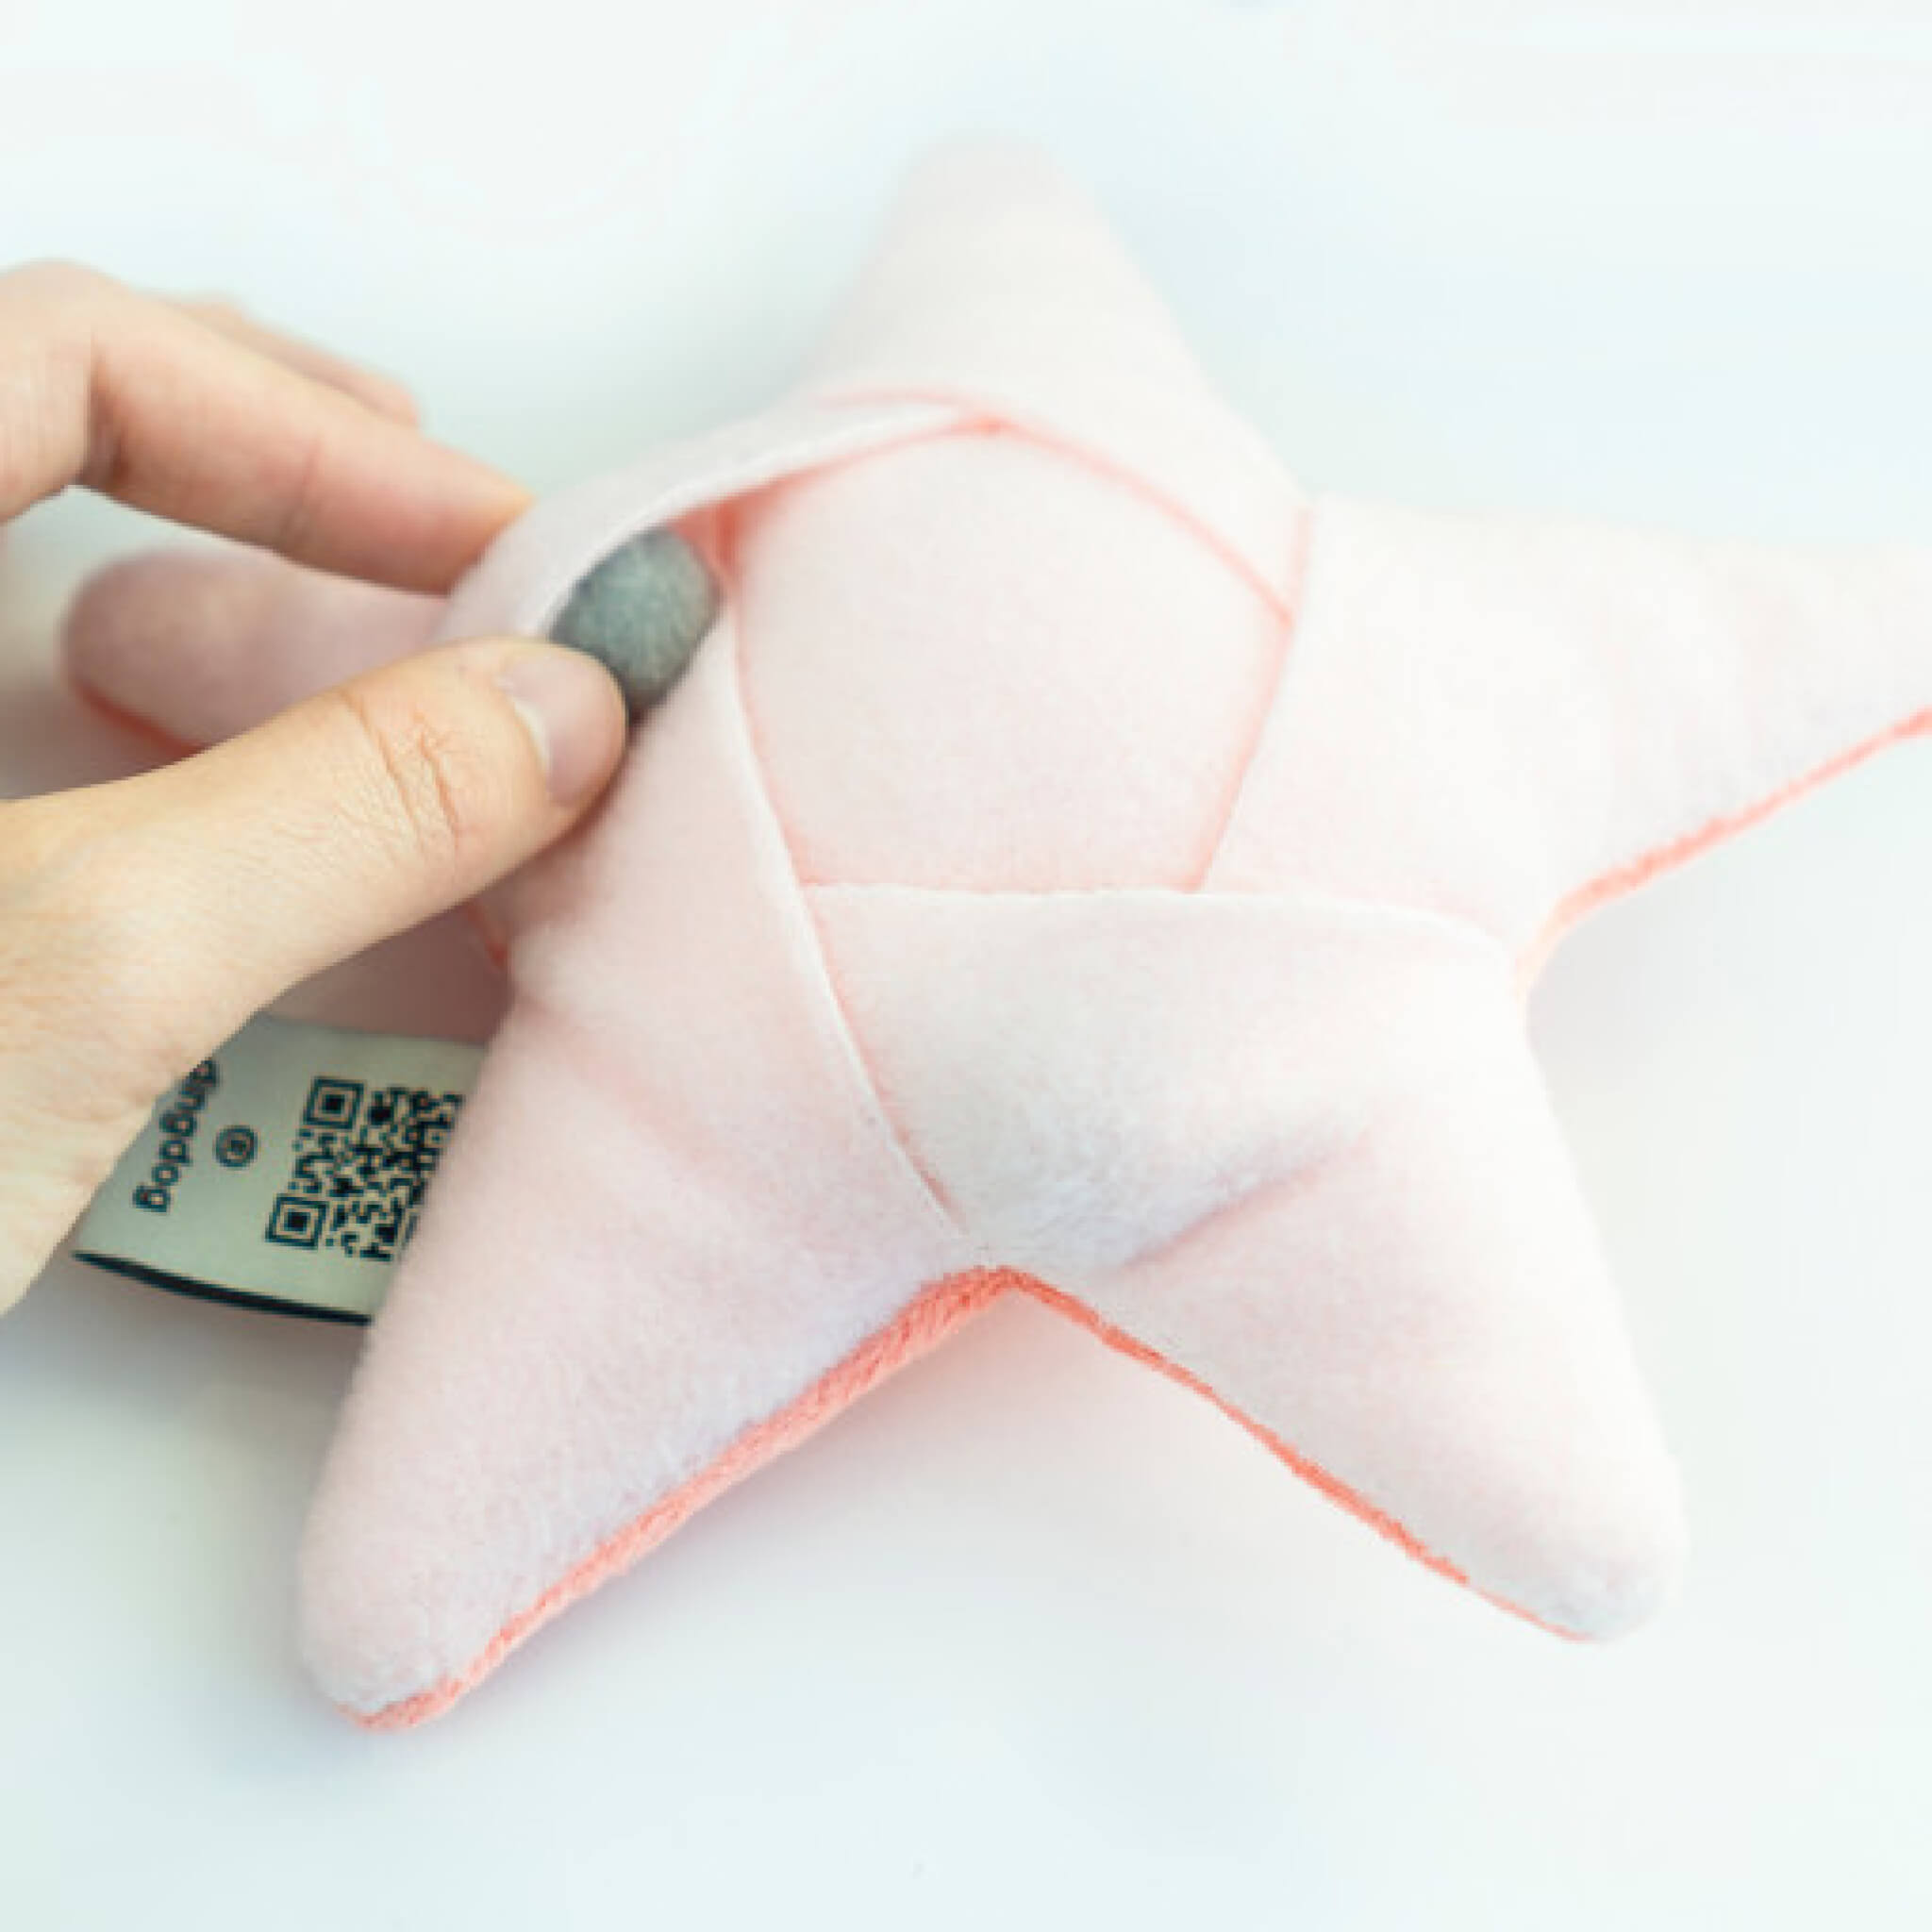 Inserting food and snacks into pockets of starfish nosework toy.